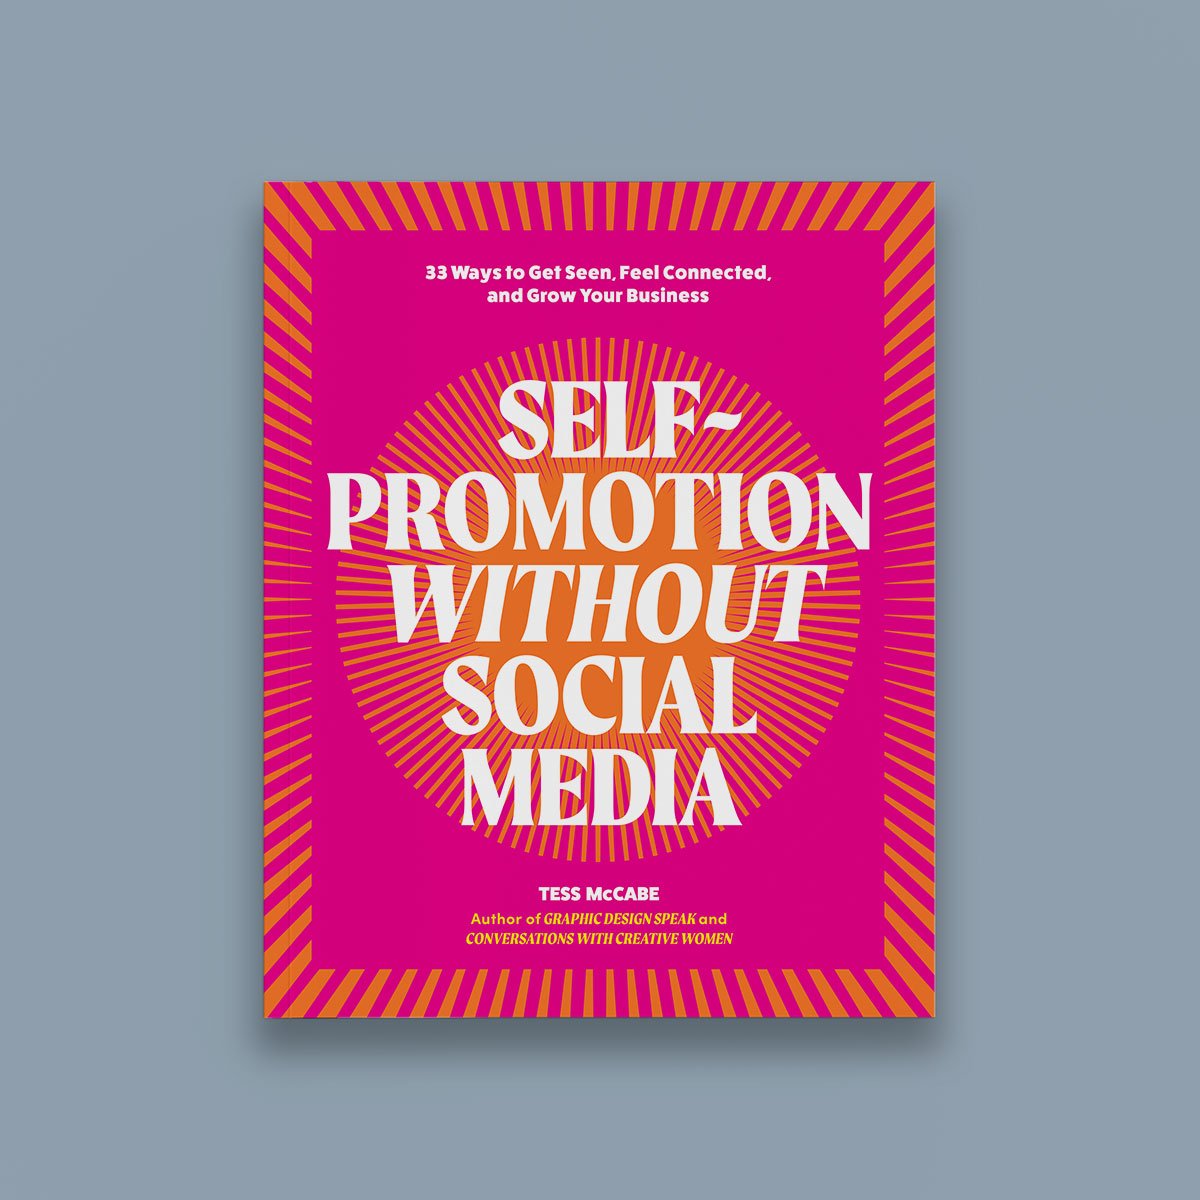 Front cover of Self-Promotion Without Social Media: 33 Ways to Get Seen, Feel Connected, and Grow Your Business by Tess McCabe